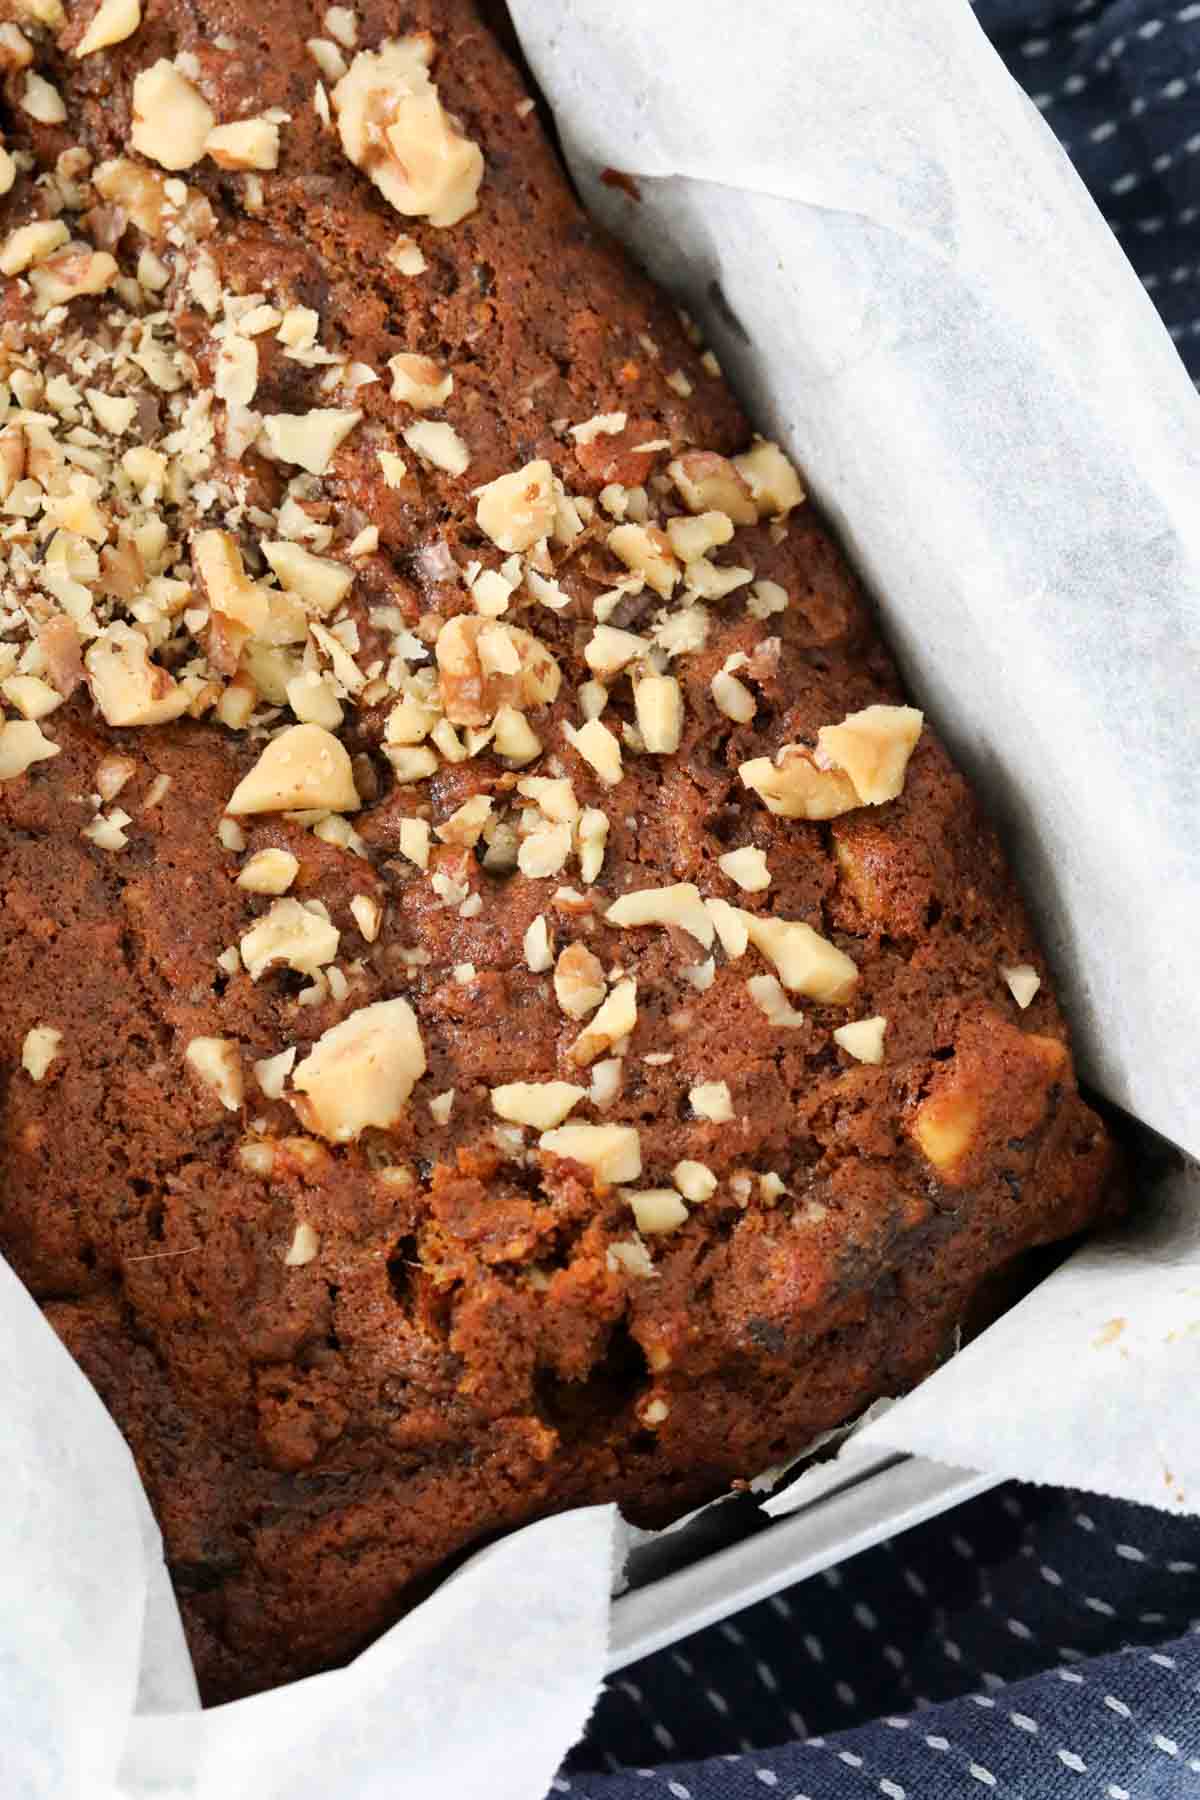 A close up showing walnuts sprinkled over a date loaf.